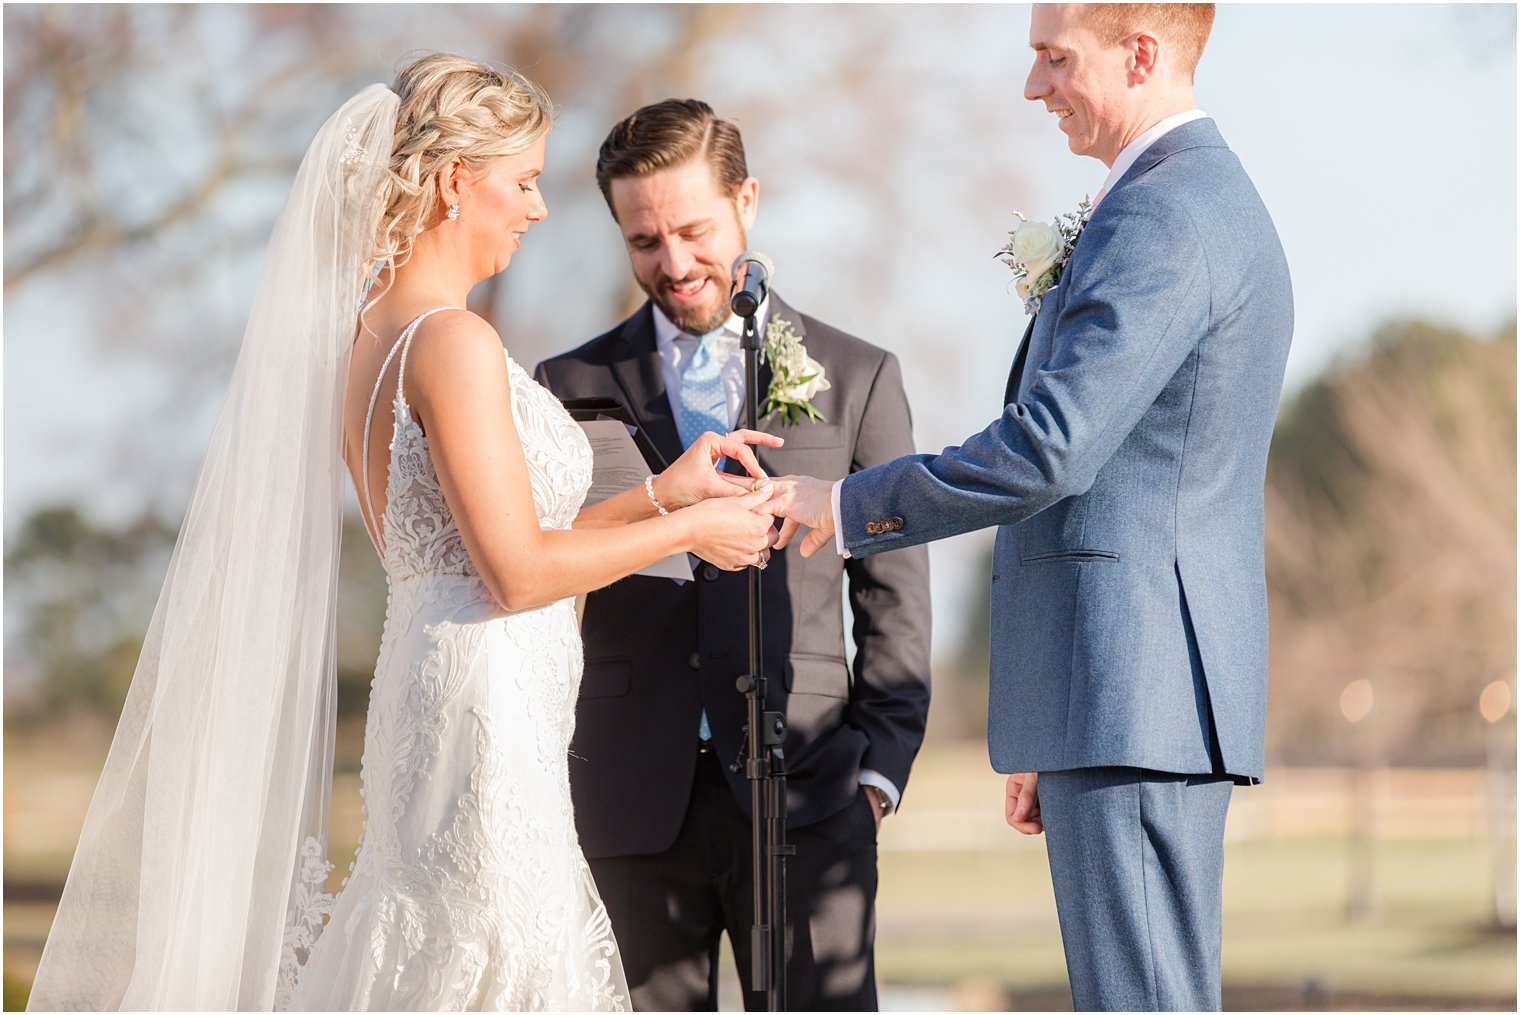 ring exchange during outdoor ceremony at Renault Winery in Egg Harbor Township, NJ